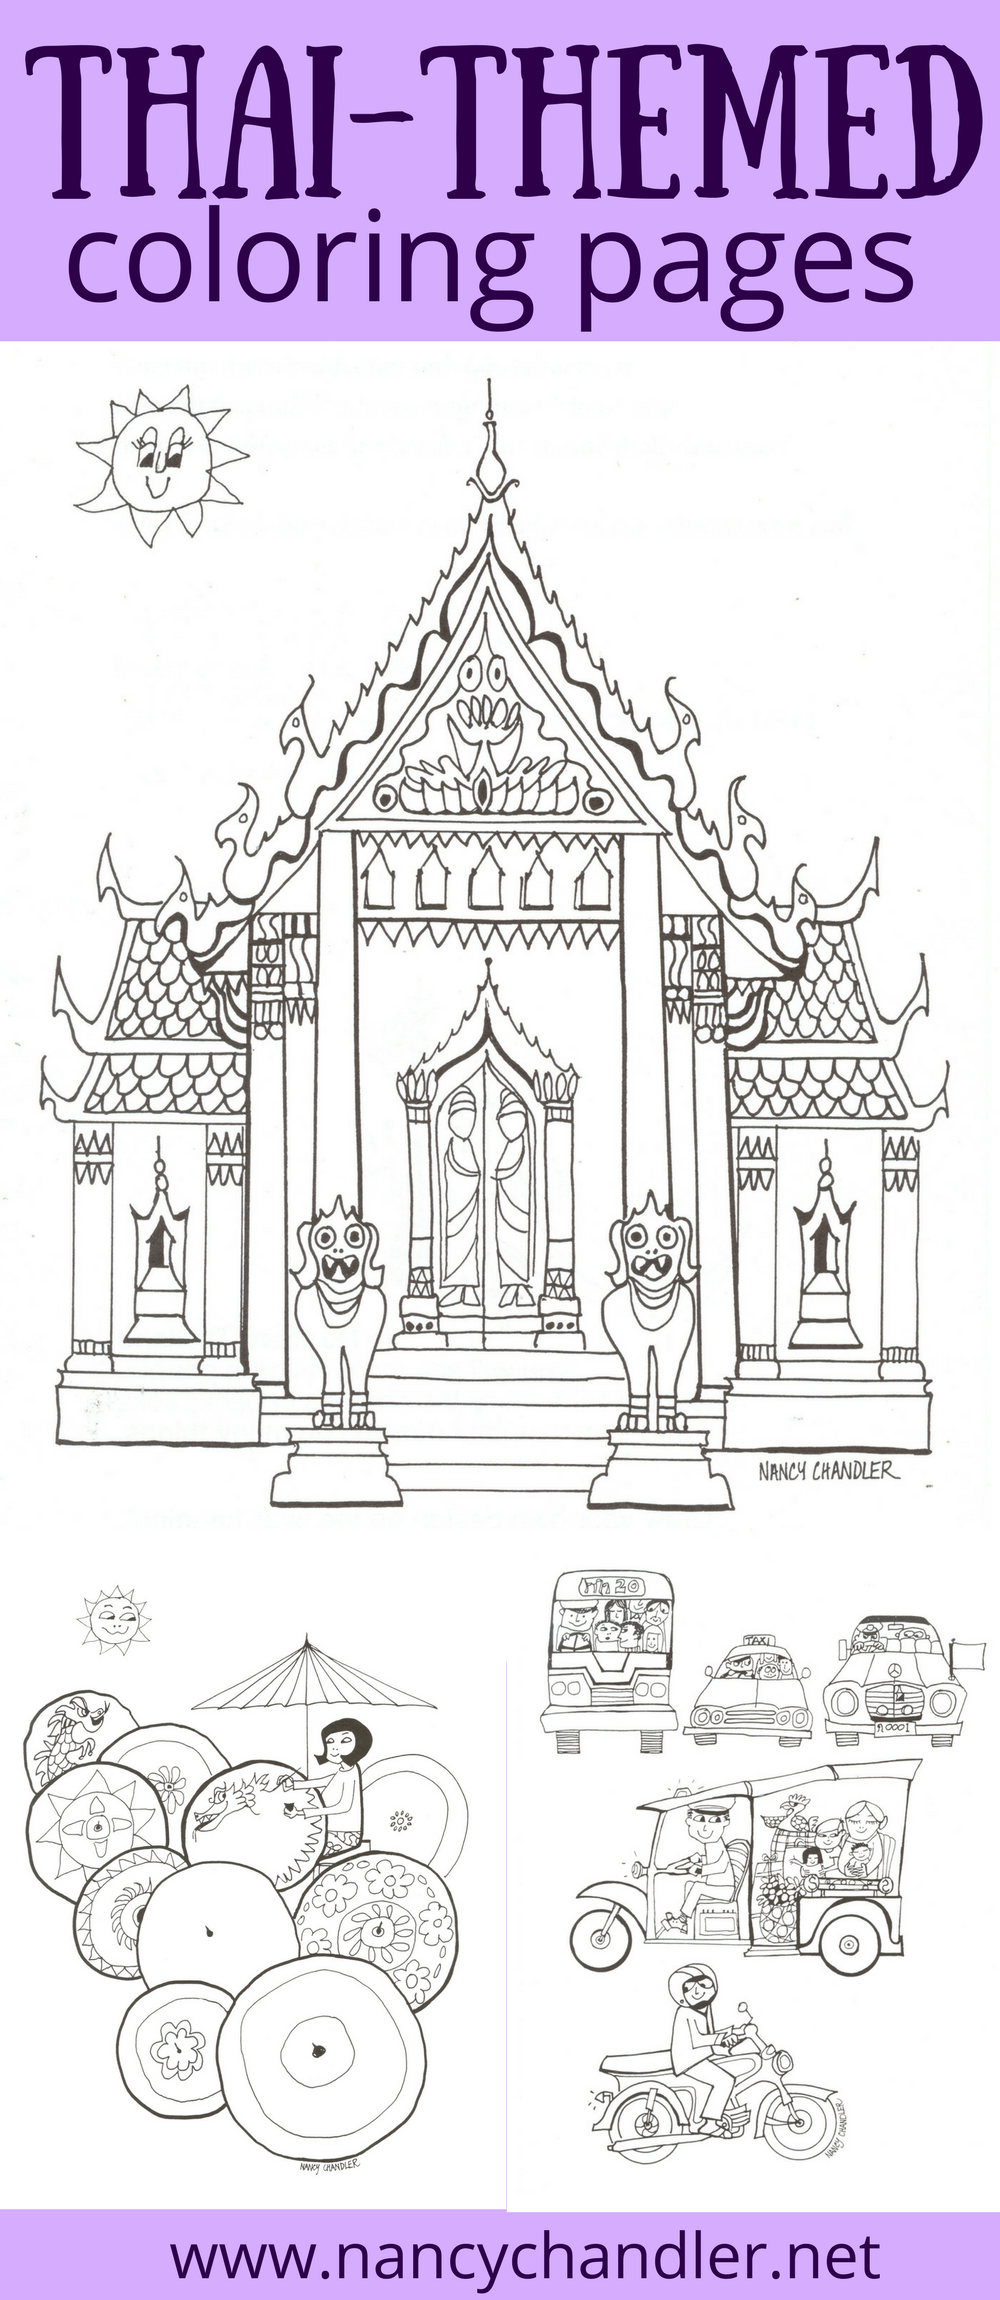 Thailand themed coloring books and free downloads from nancy chandler get free coloring pages for adults and childreâ coloring pages thailand kids thailand art